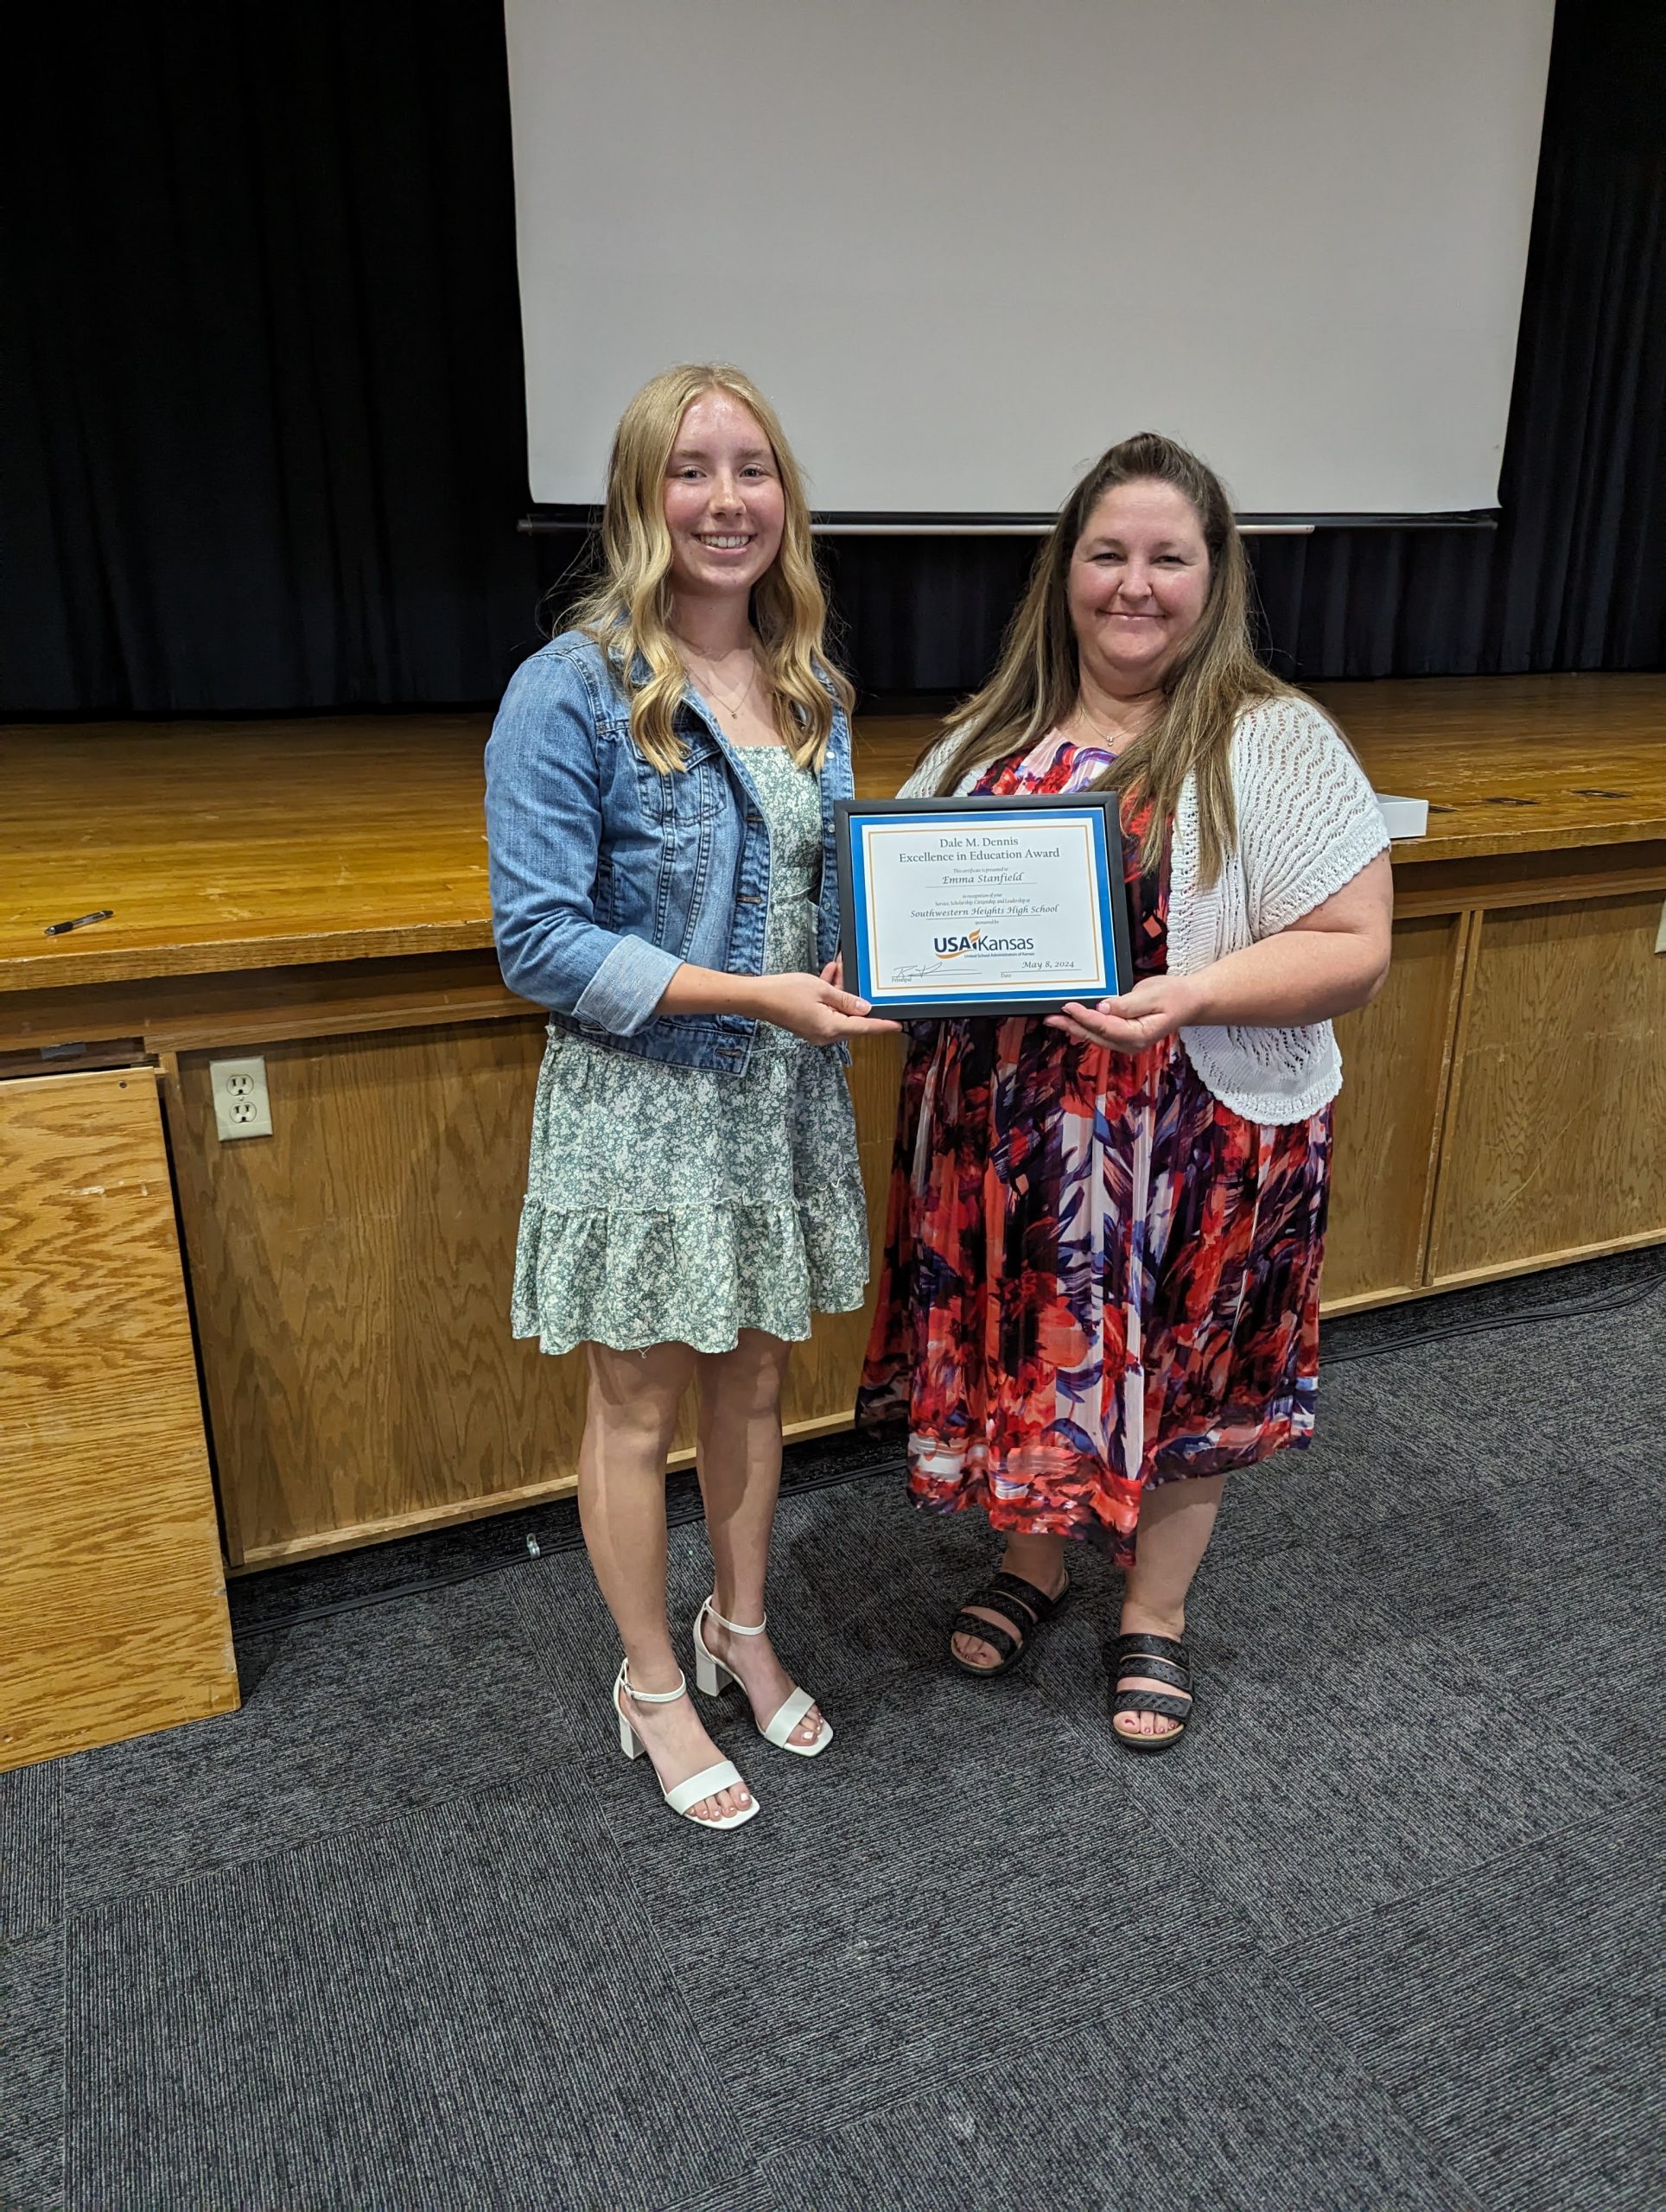 Local Student is Recipient of the Dale M. Dennis Award